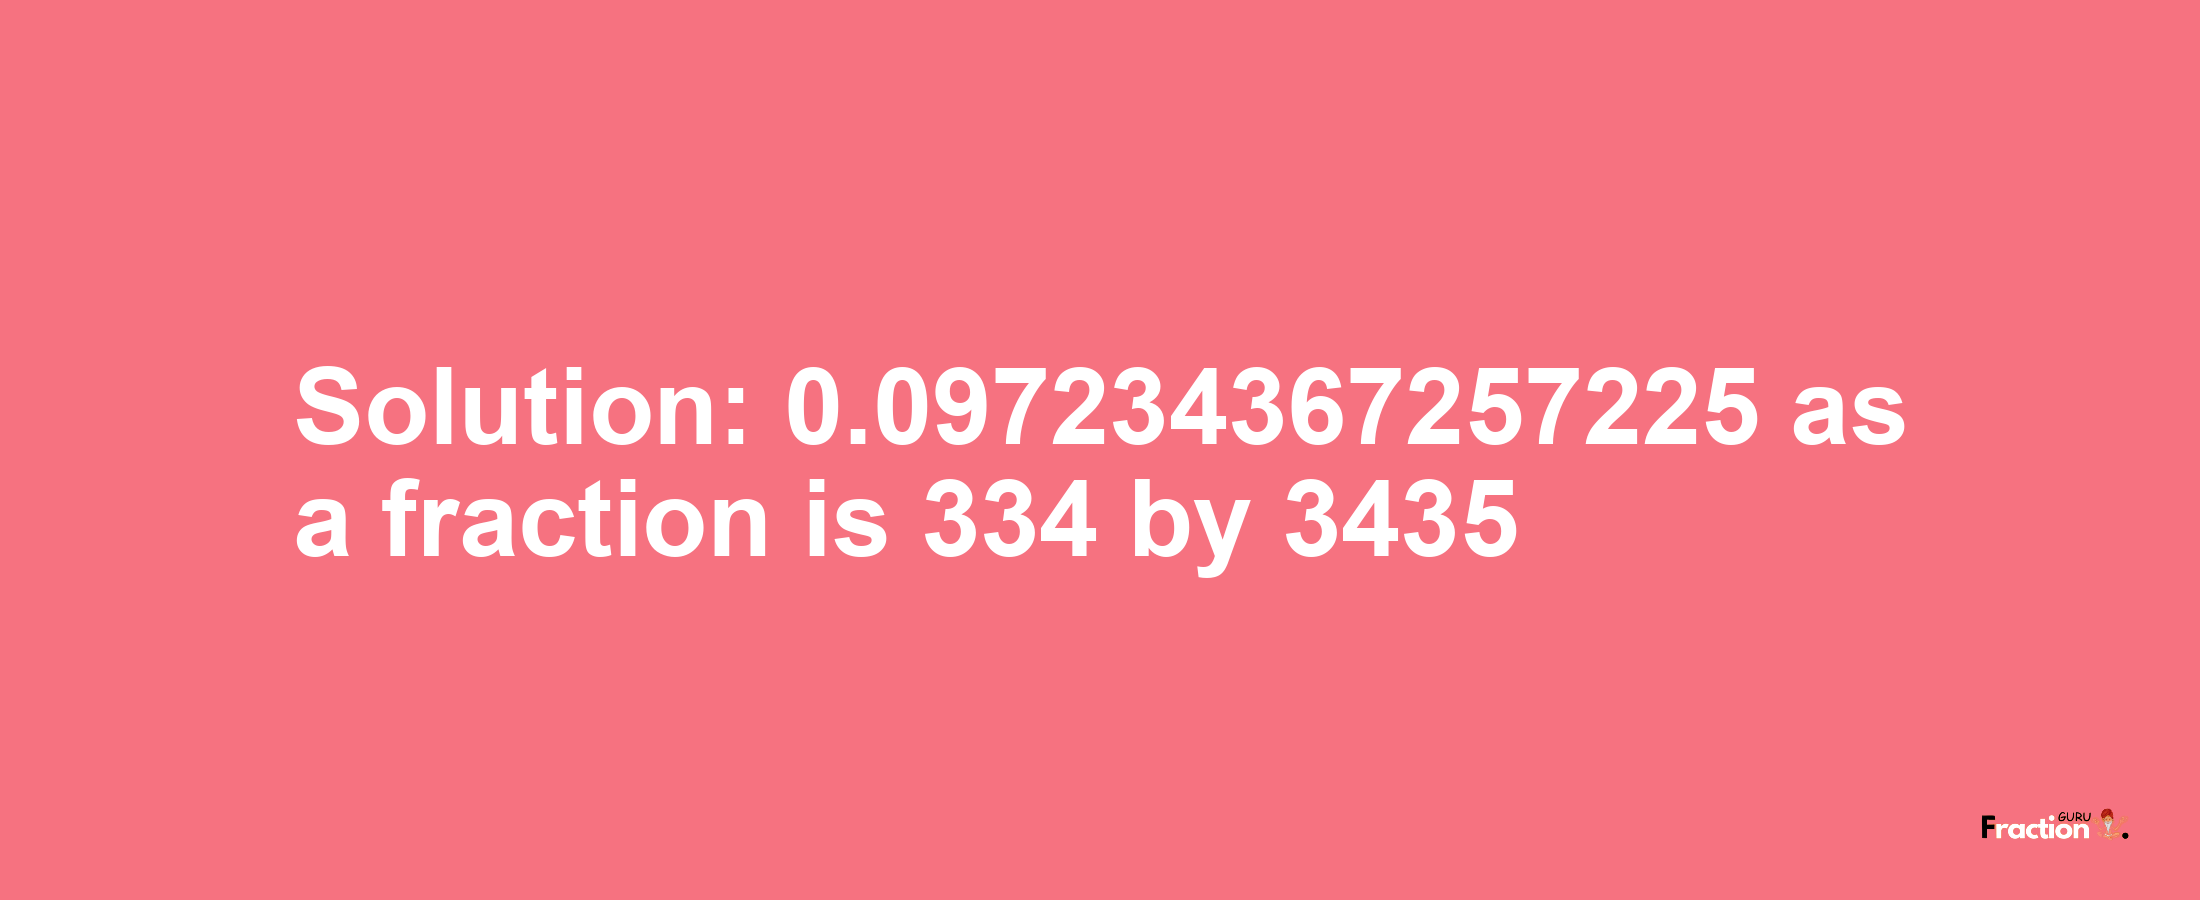 Solution:0.097234367257225 as a fraction is 334/3435